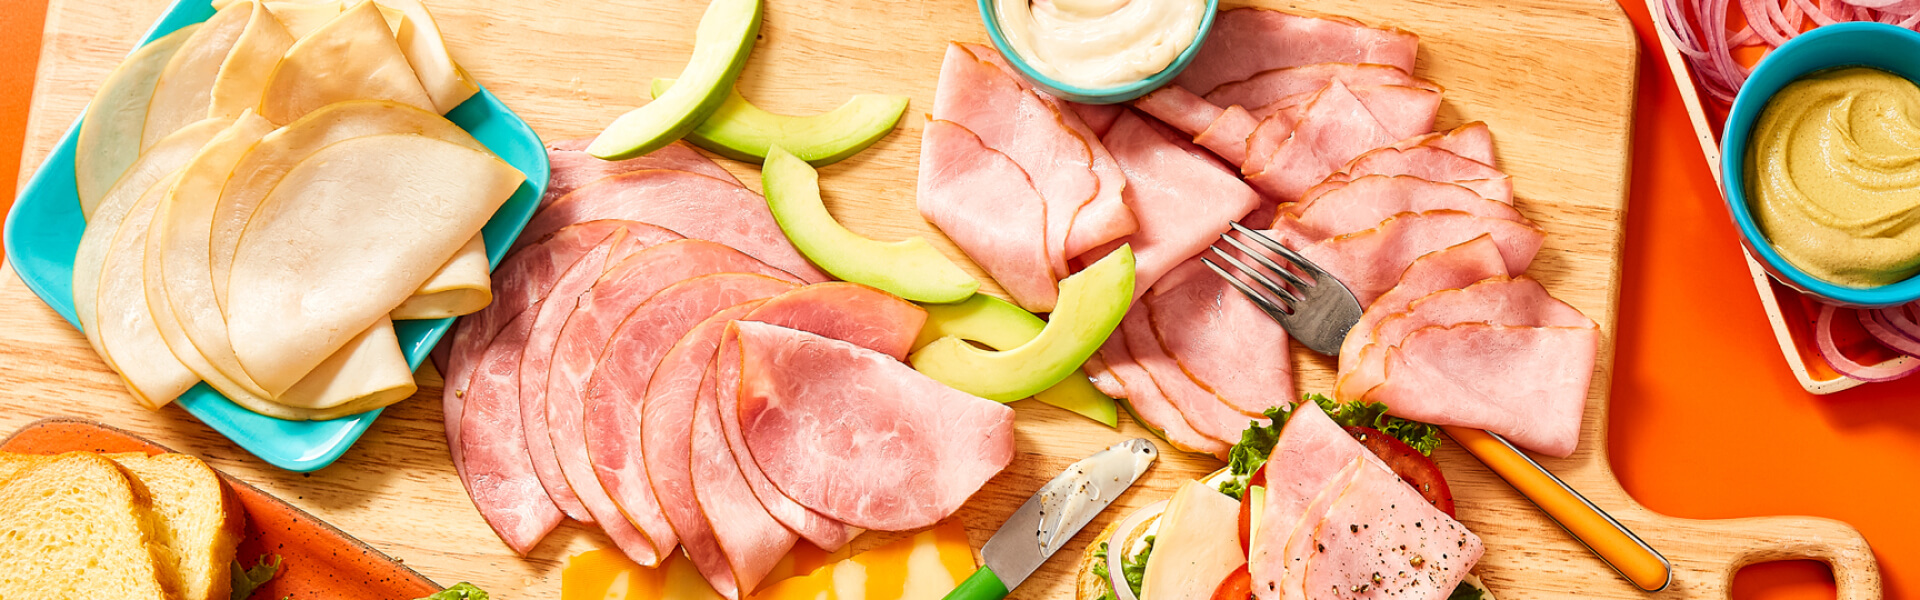 Overhead shot of all natural deli-meats on cutting board with sliced avocados